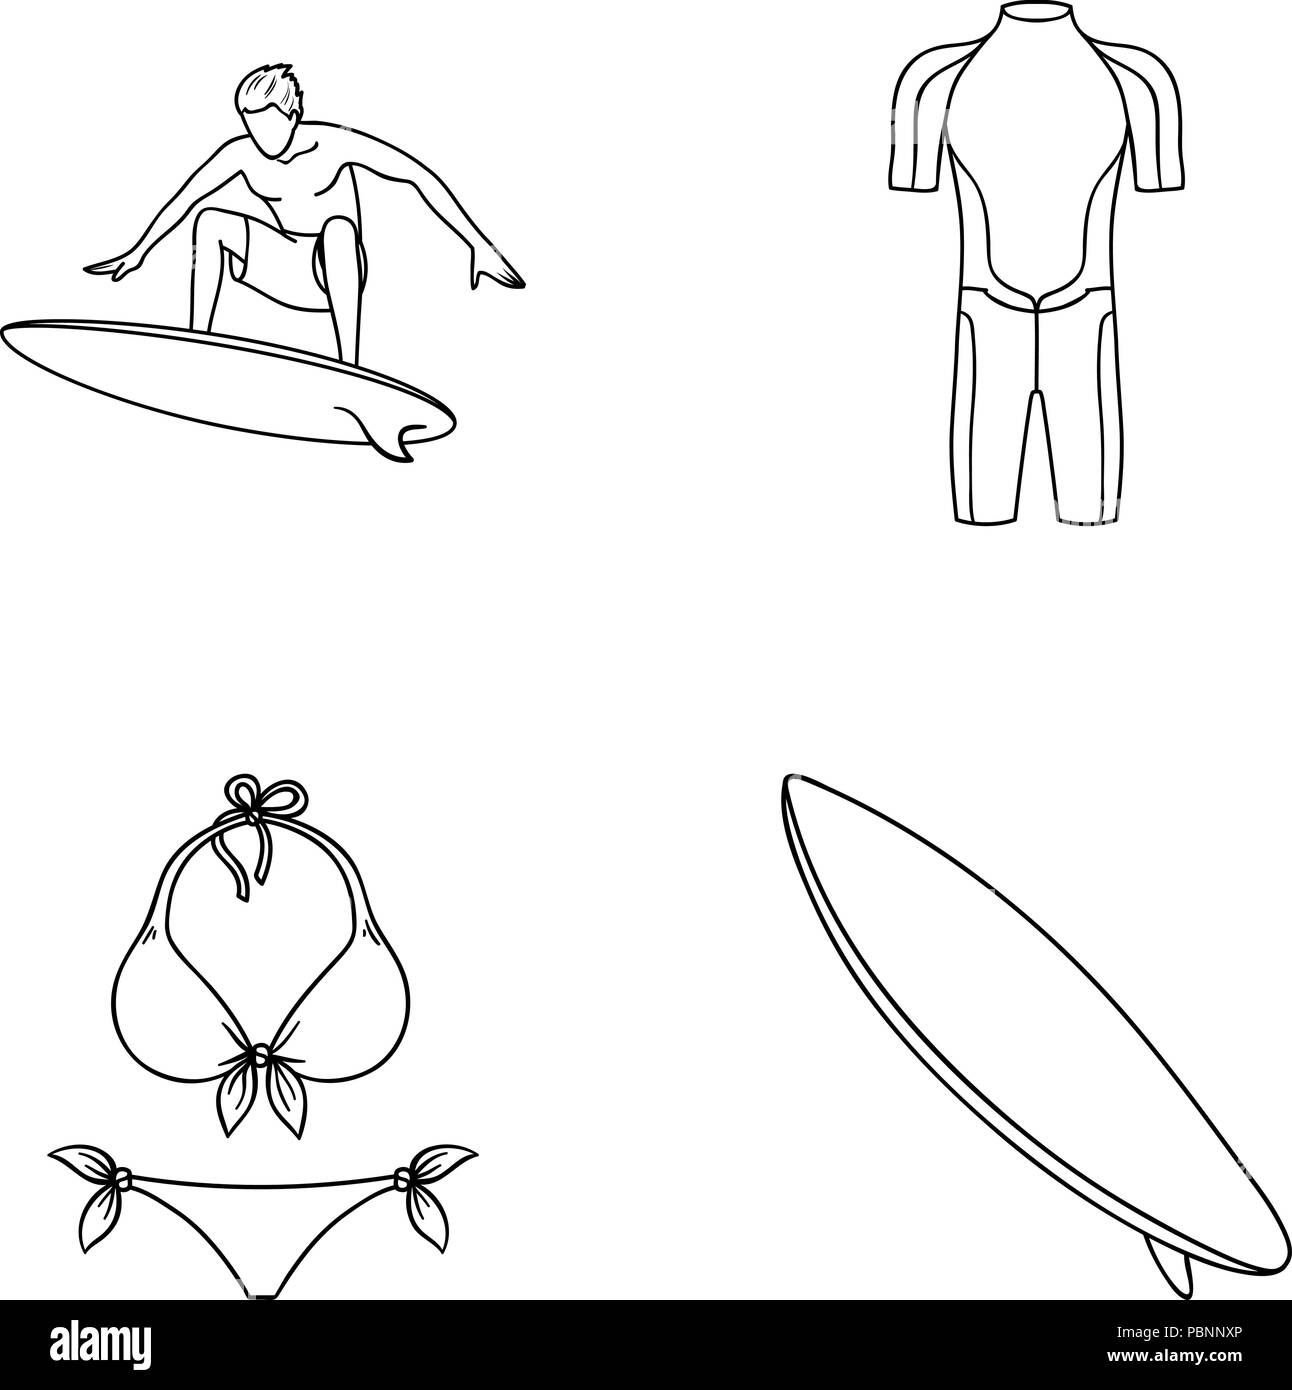 Wet Suit Surf Company Based SVG Eps Png Dxf in Folders 